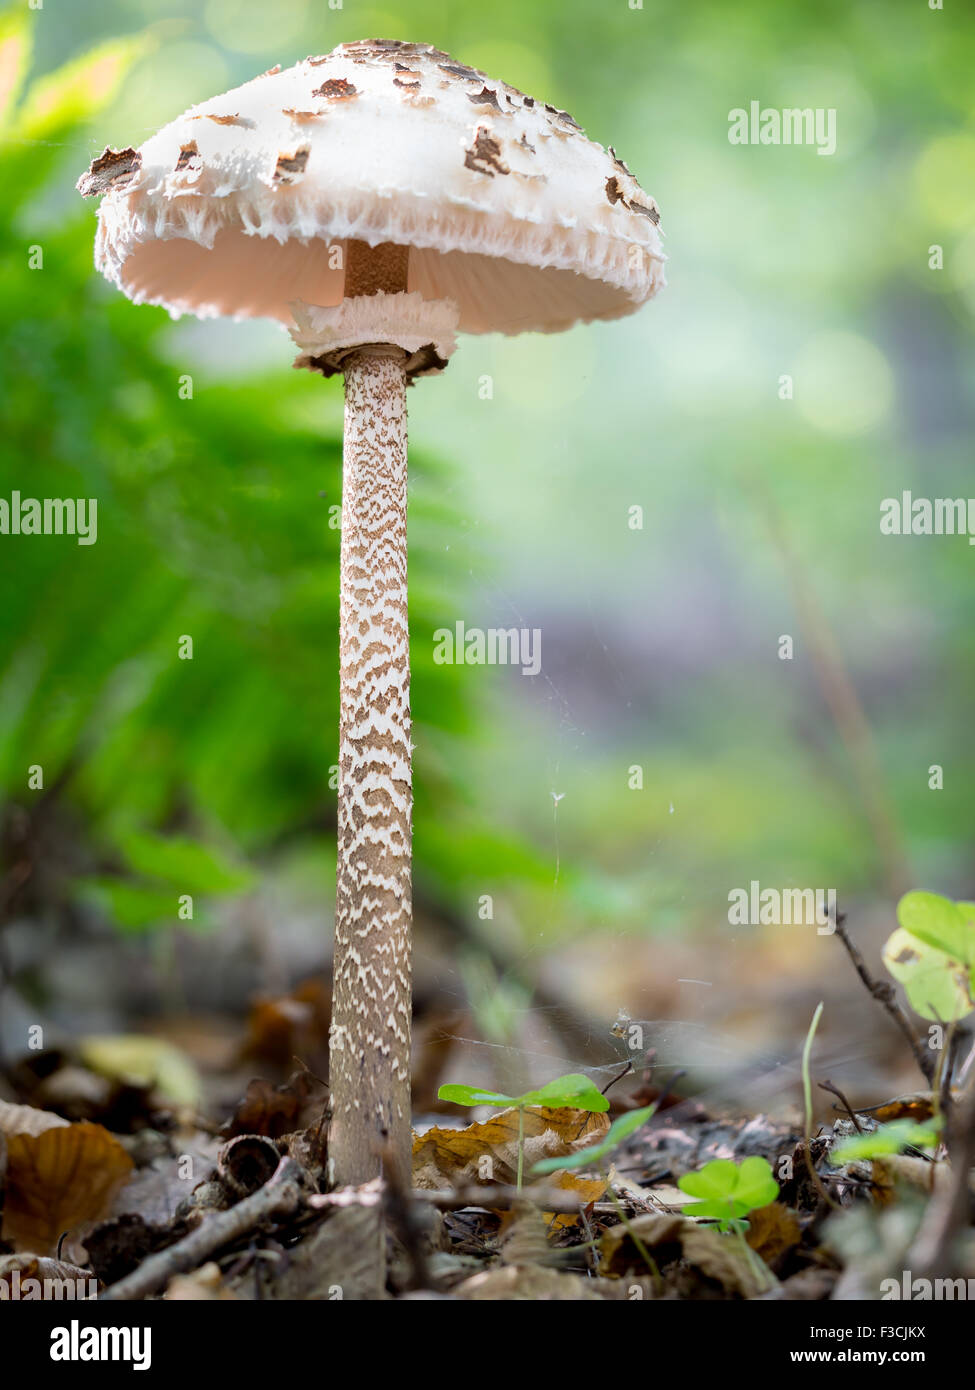 Parasol Fungus mushroom growing in the forest Stock Photo